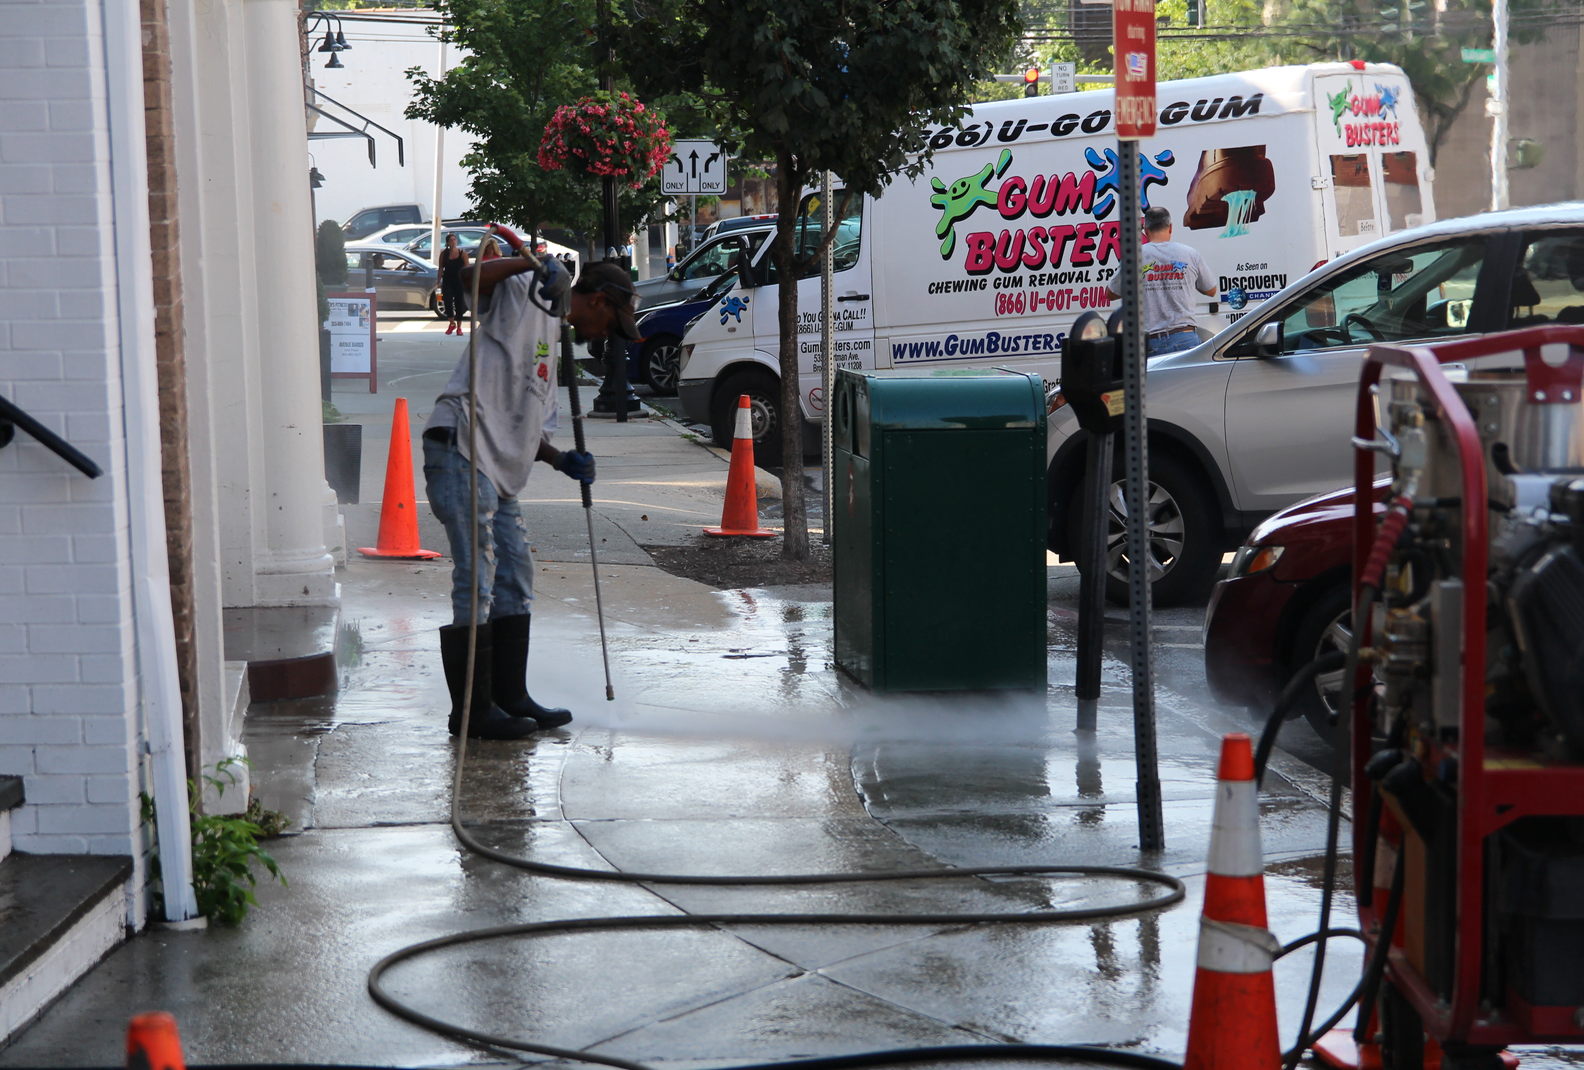 Gum Busters at work on Greenwich Avenue. Photo: Leslie Yager